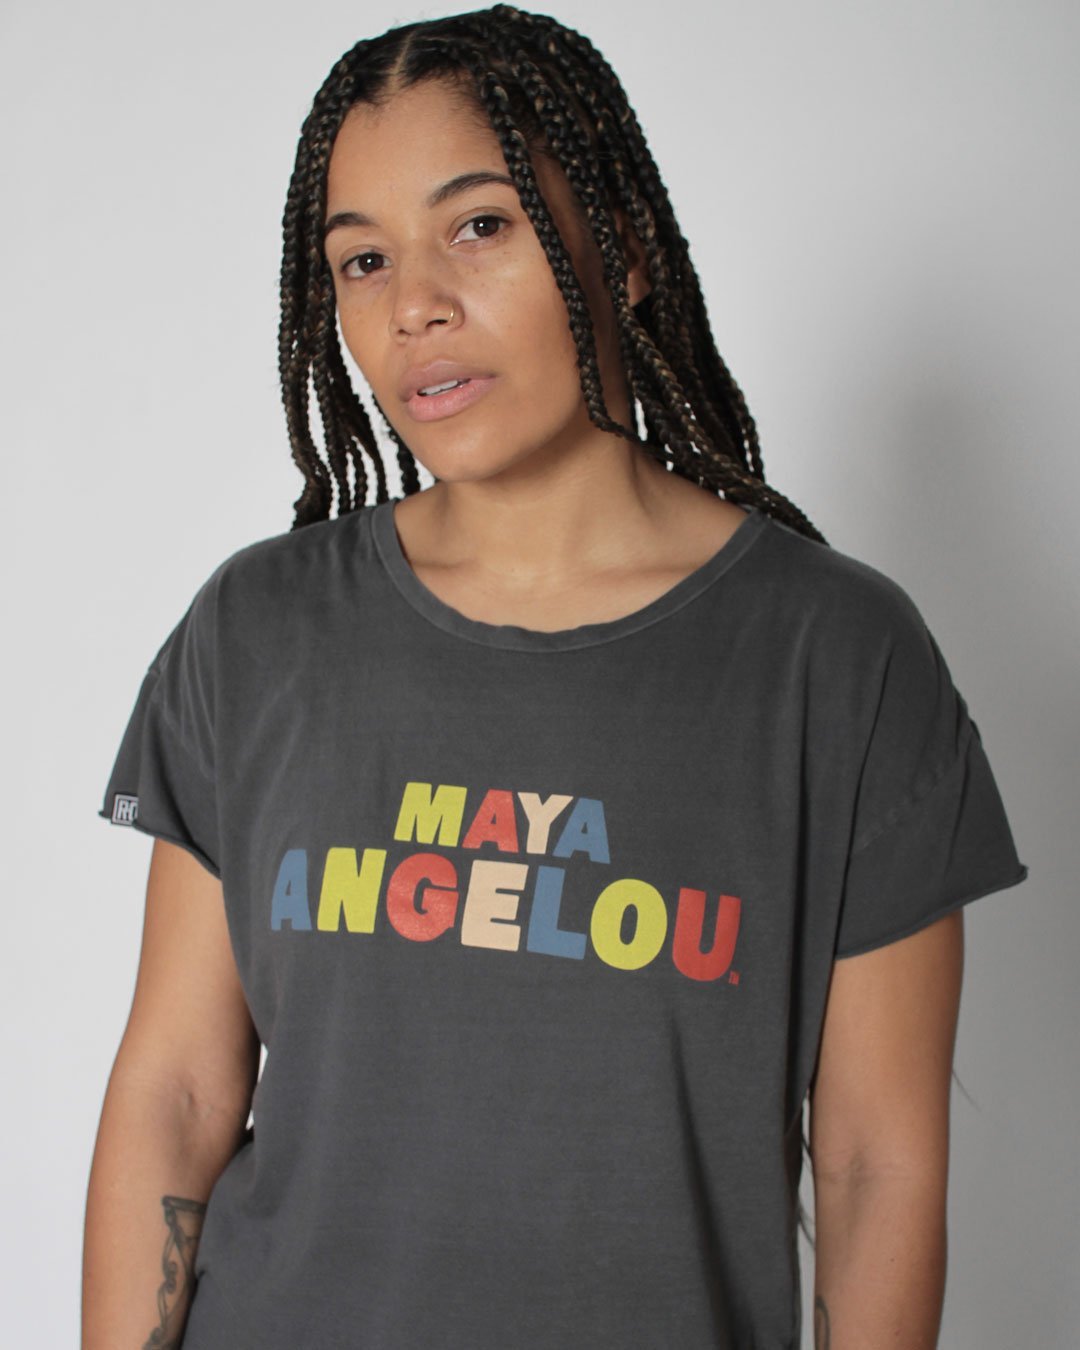 BHT - Maya Angelou Women&#39;s Tee - Roots of Inc dba Roots of Fight